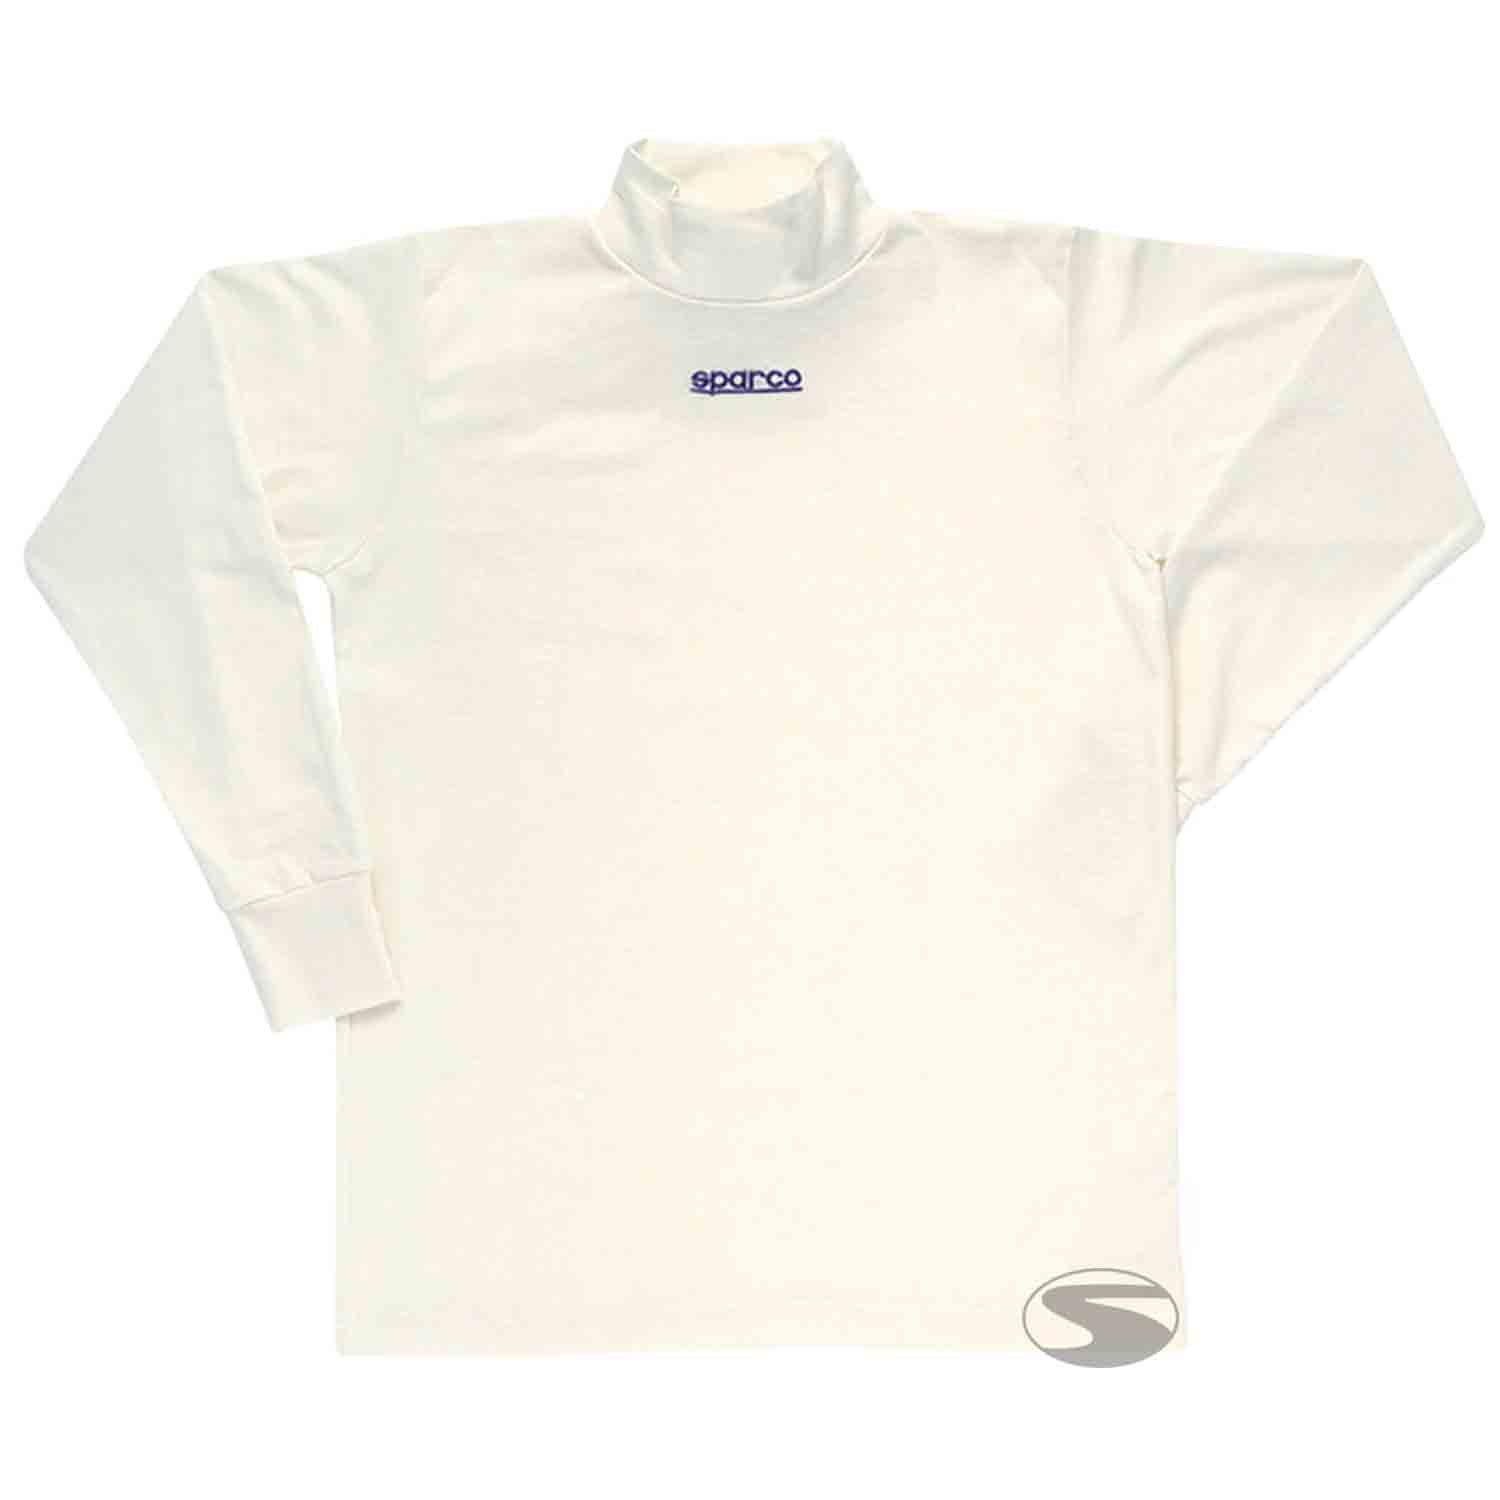 Sparco Pullover Coolmax X-COOL Silver, weiß